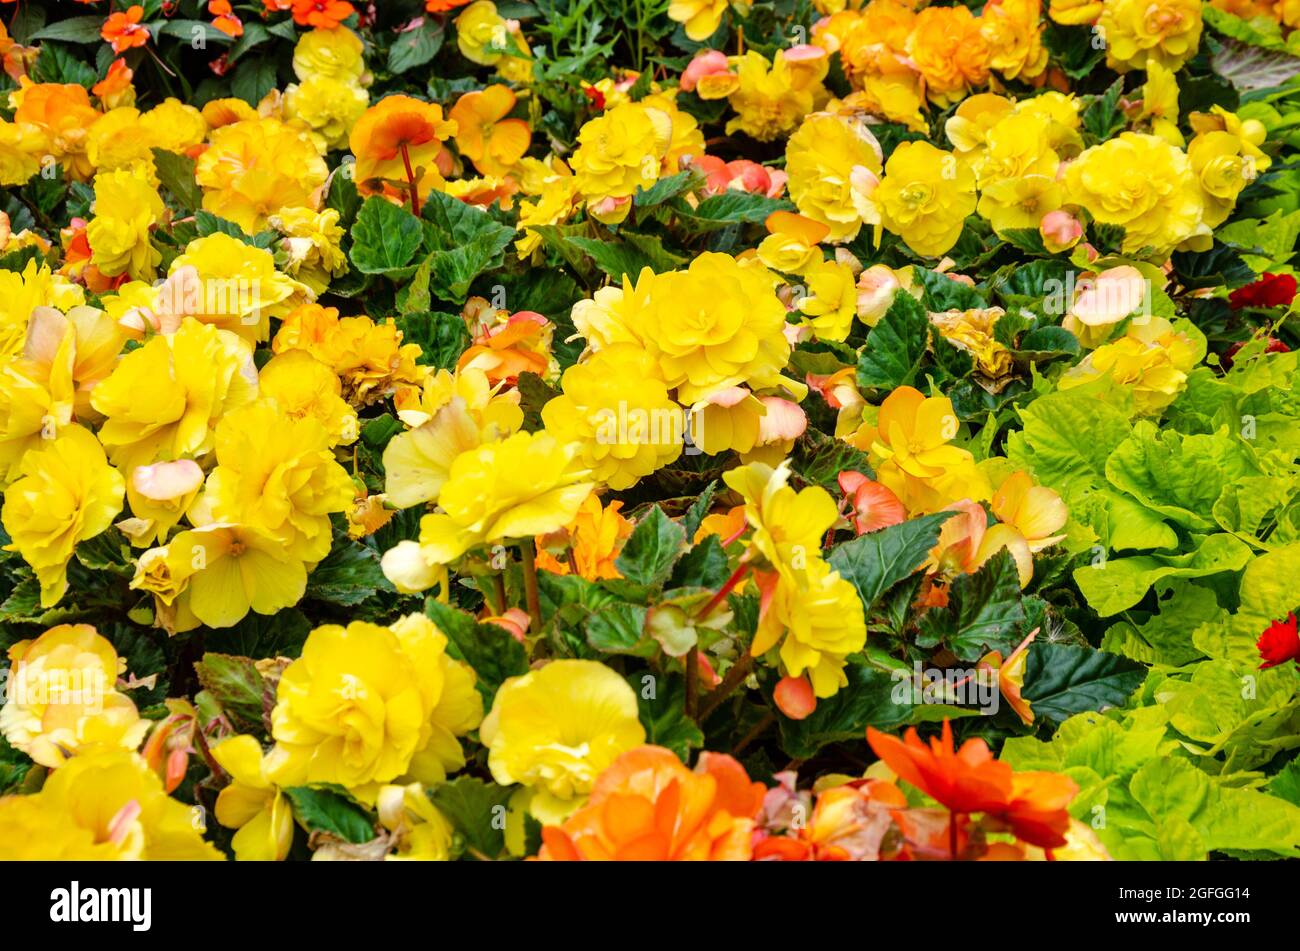 A display of bright yellow begonia flowers. Stock Photo